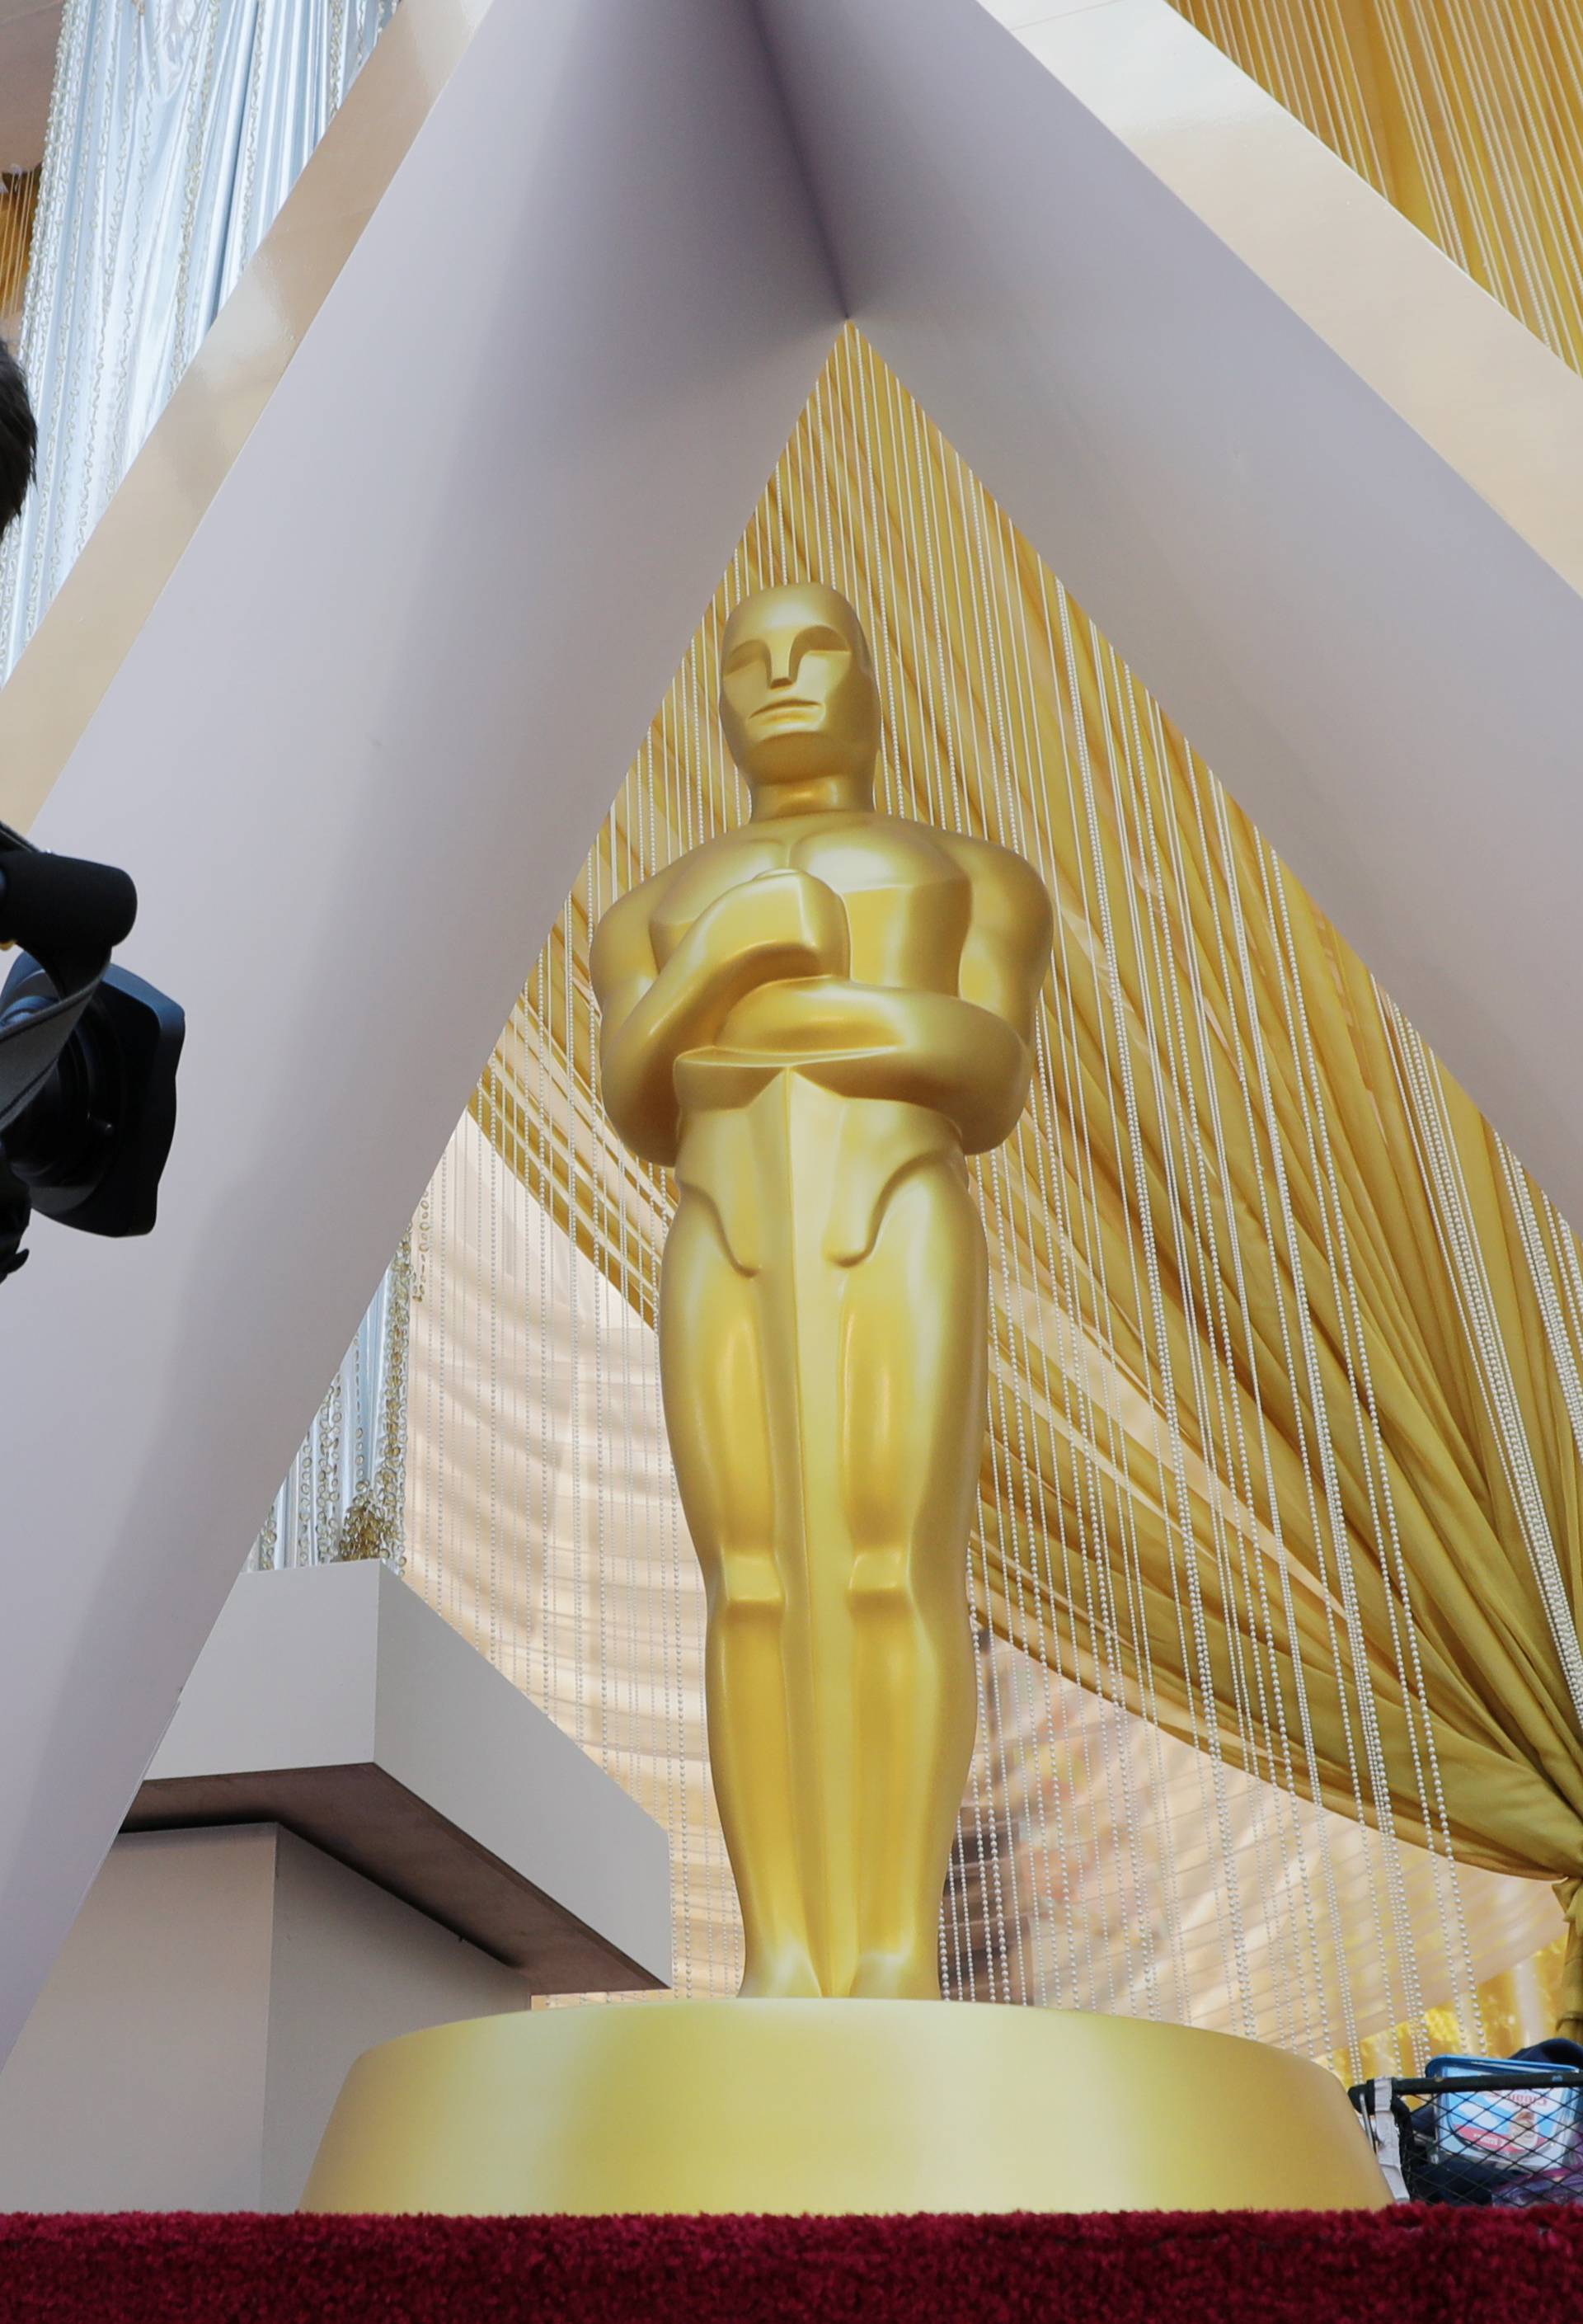 A cameraman films an Oscar statue on the red carpet as Oscars preparations continue for the 92nd Academy Awards in Hollywood